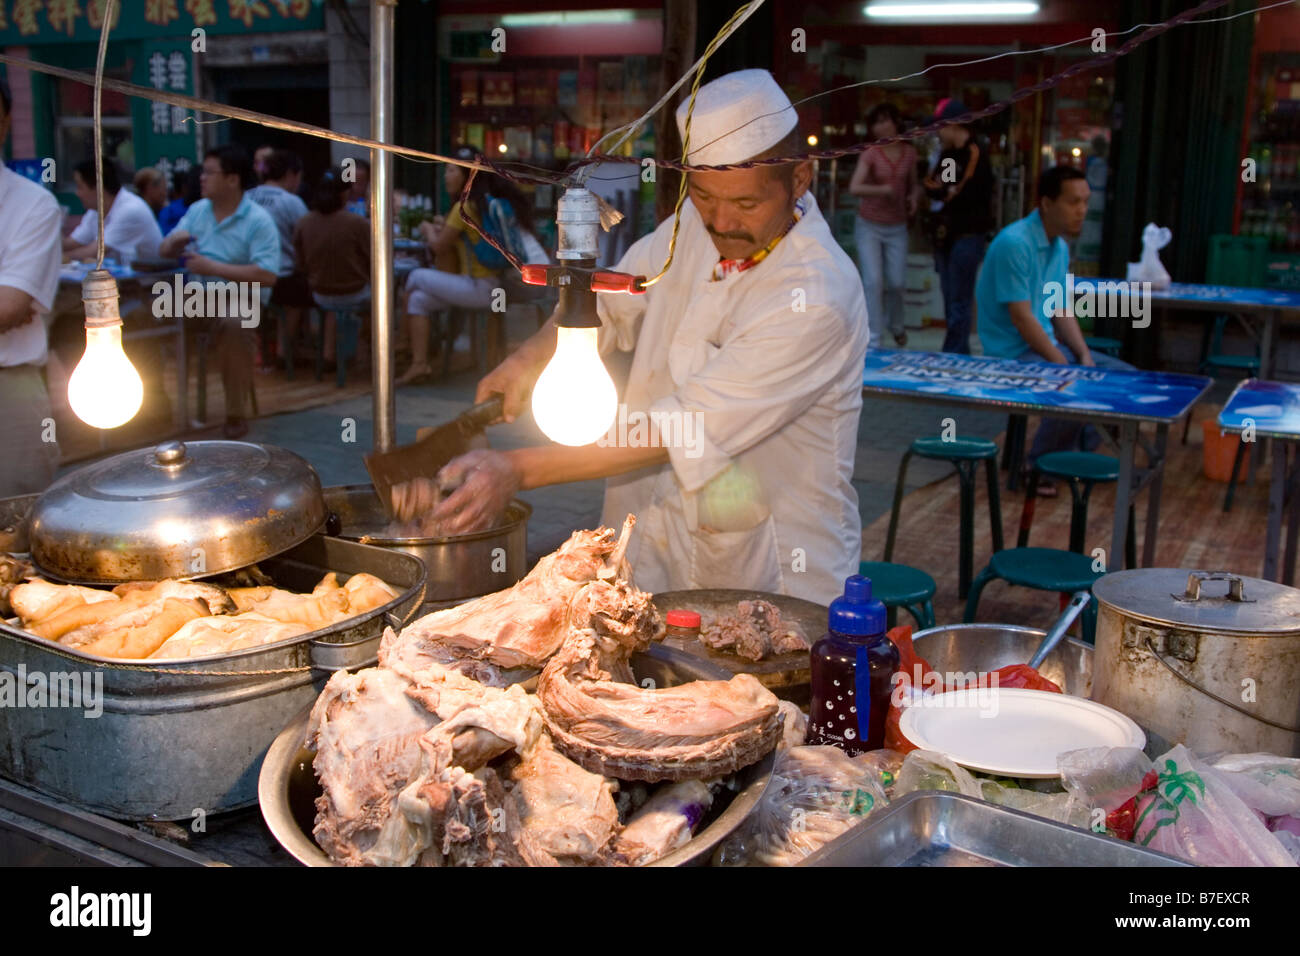 Offal and innards of sheep cooked for diners at the Uyghur night food market in Urumqi capital of Xinjiang China Stock Photo